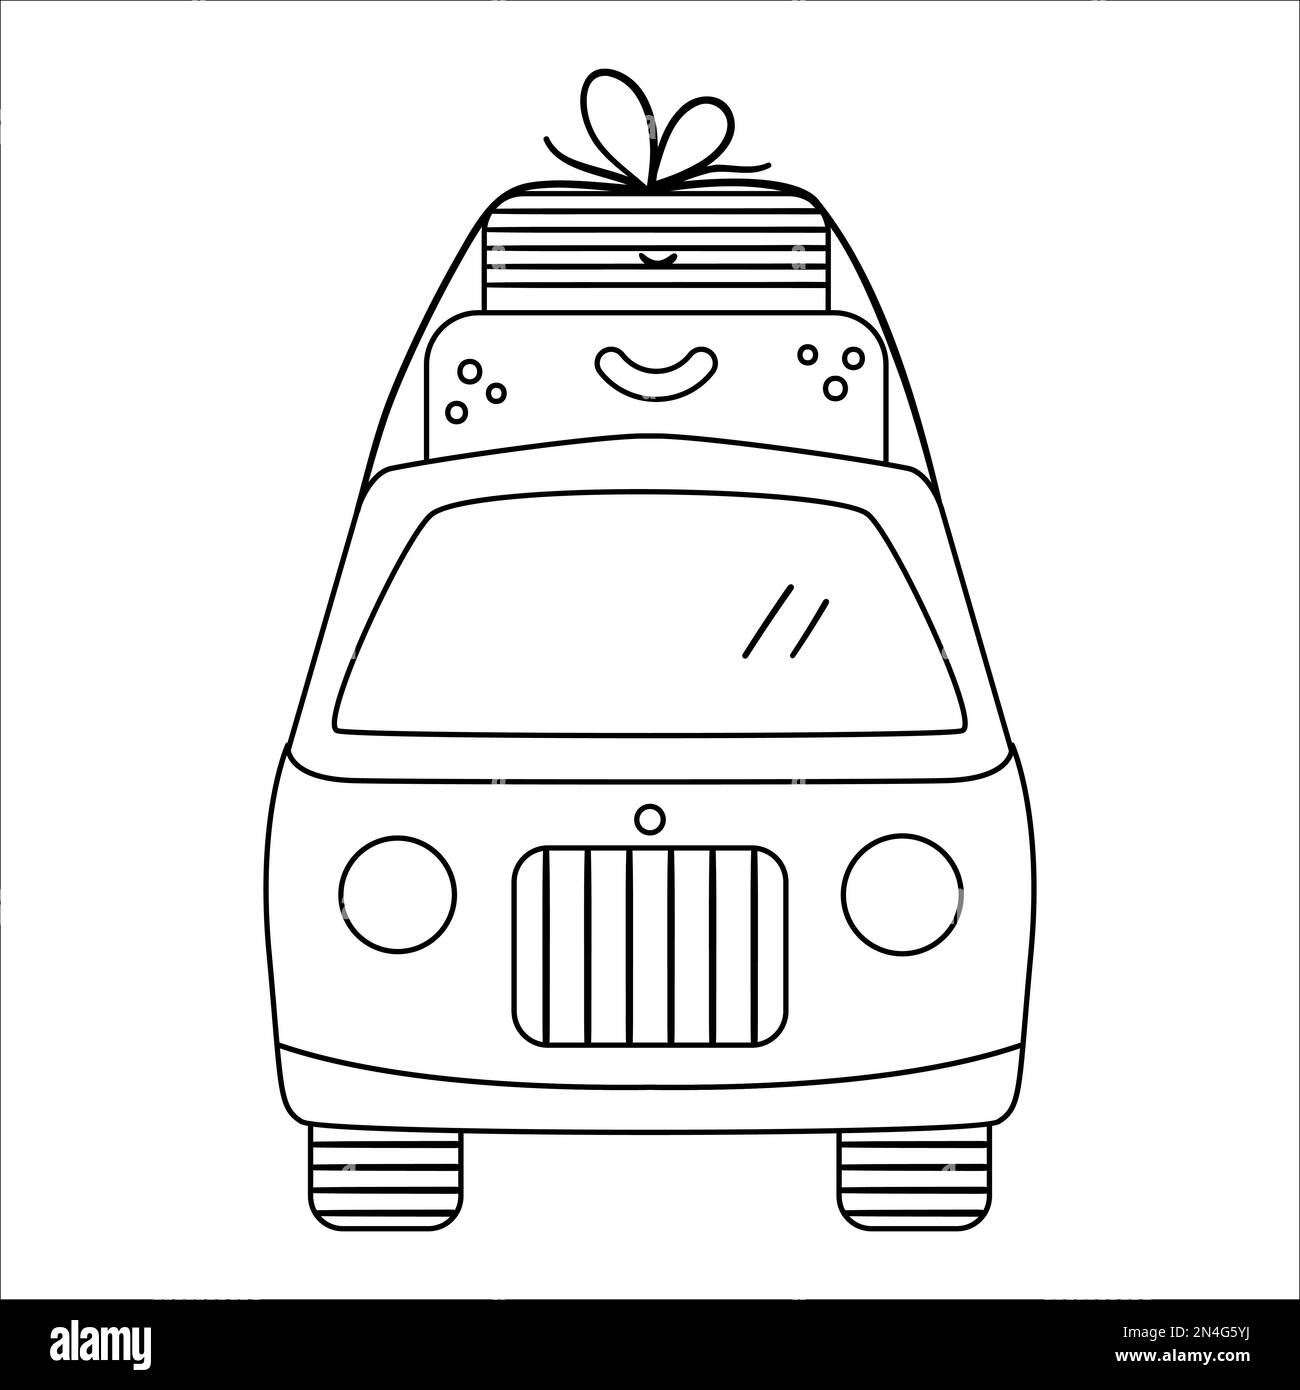 Vector black and white tourist van with suitcases on top. Cute outline ...